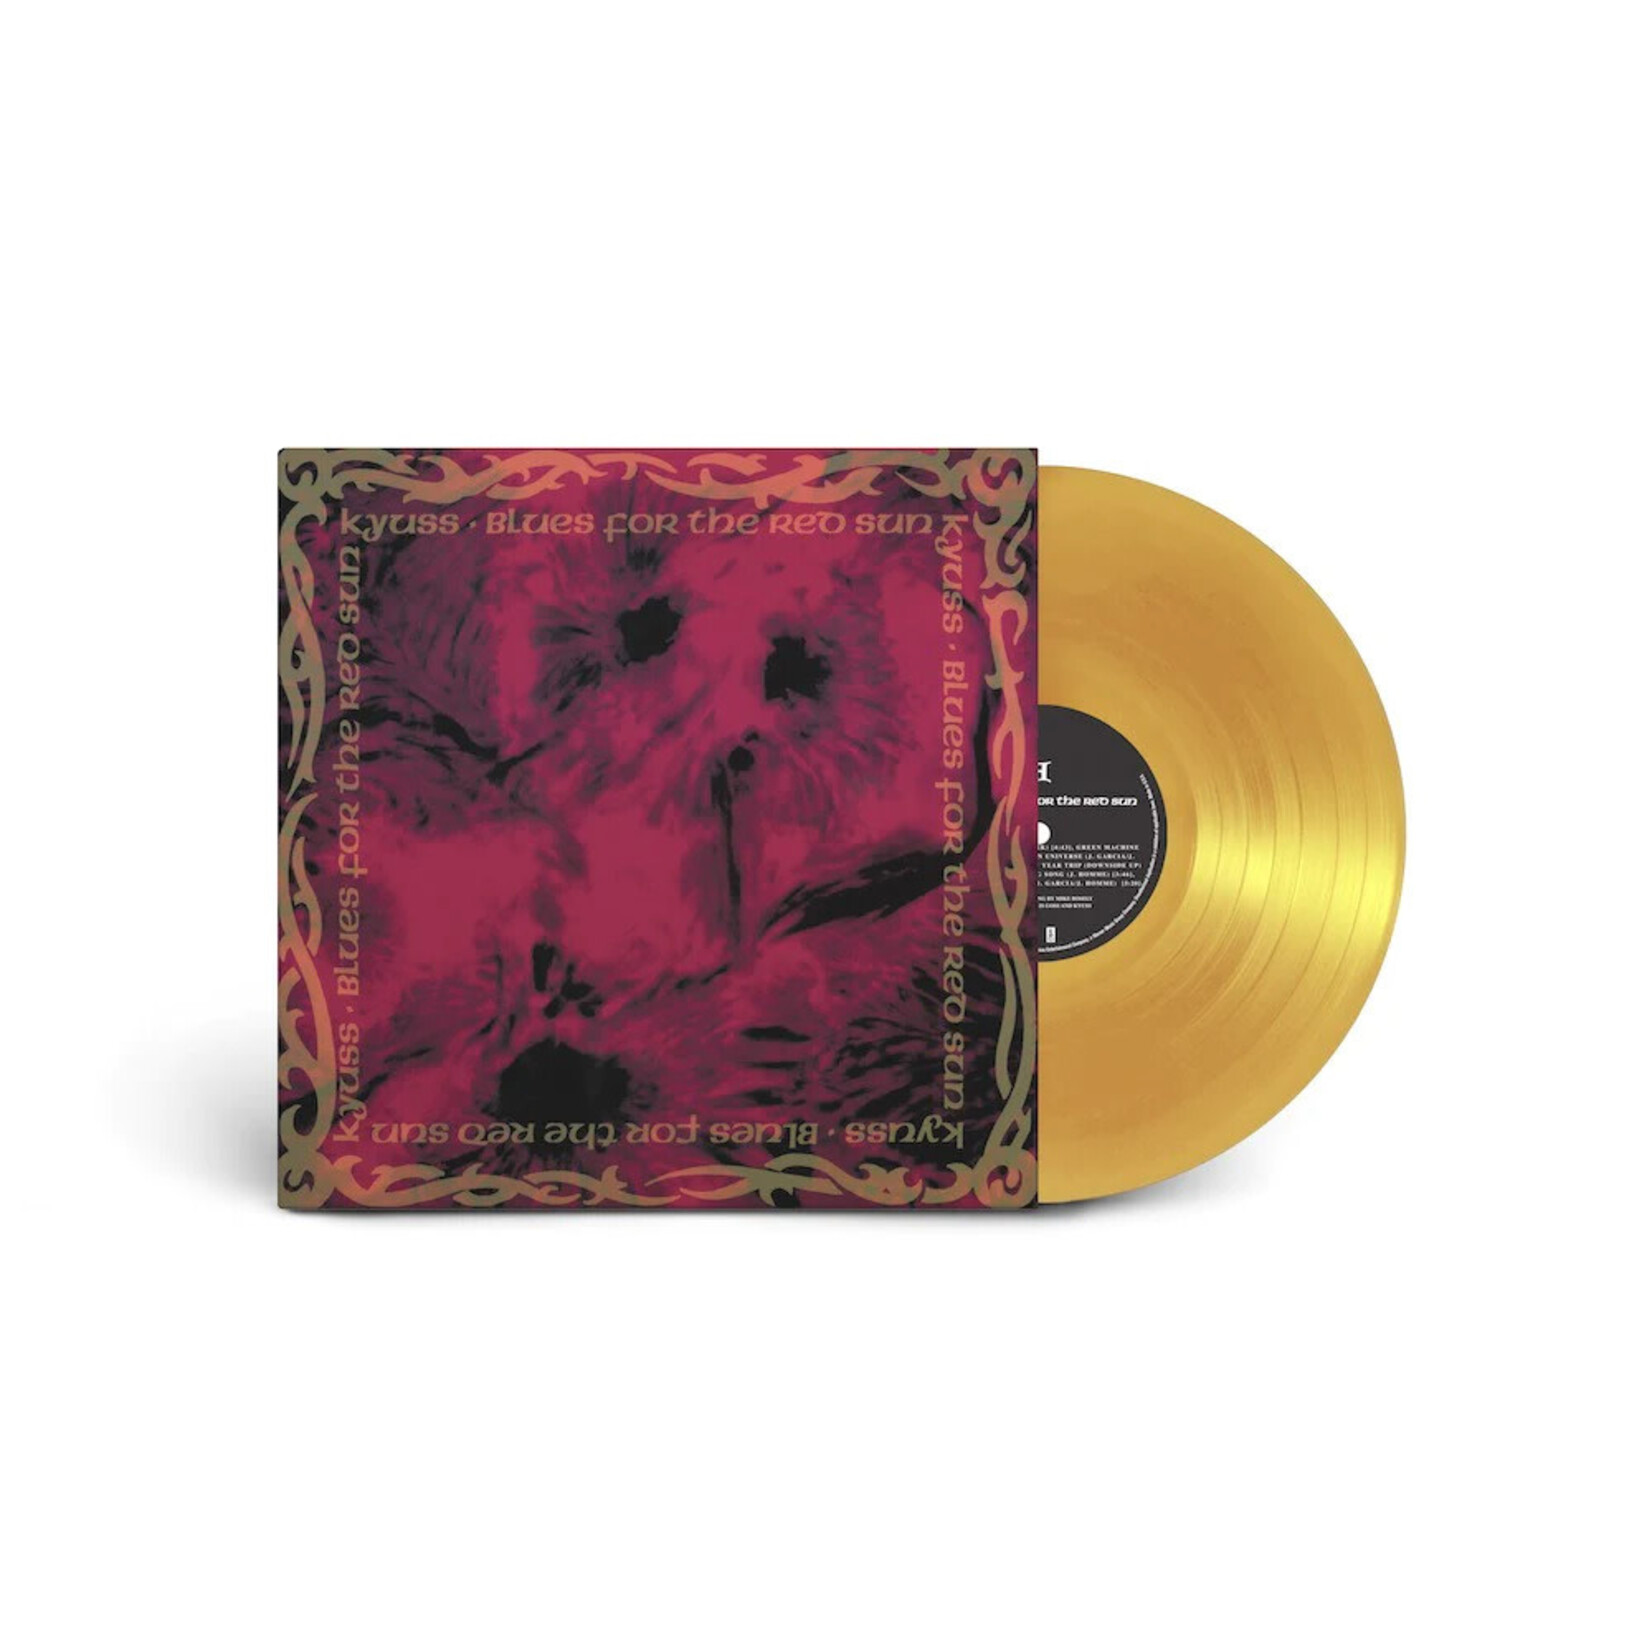 [New] Kyuss - Blues For The Red Sun (gold vinyl, indie exclusive)